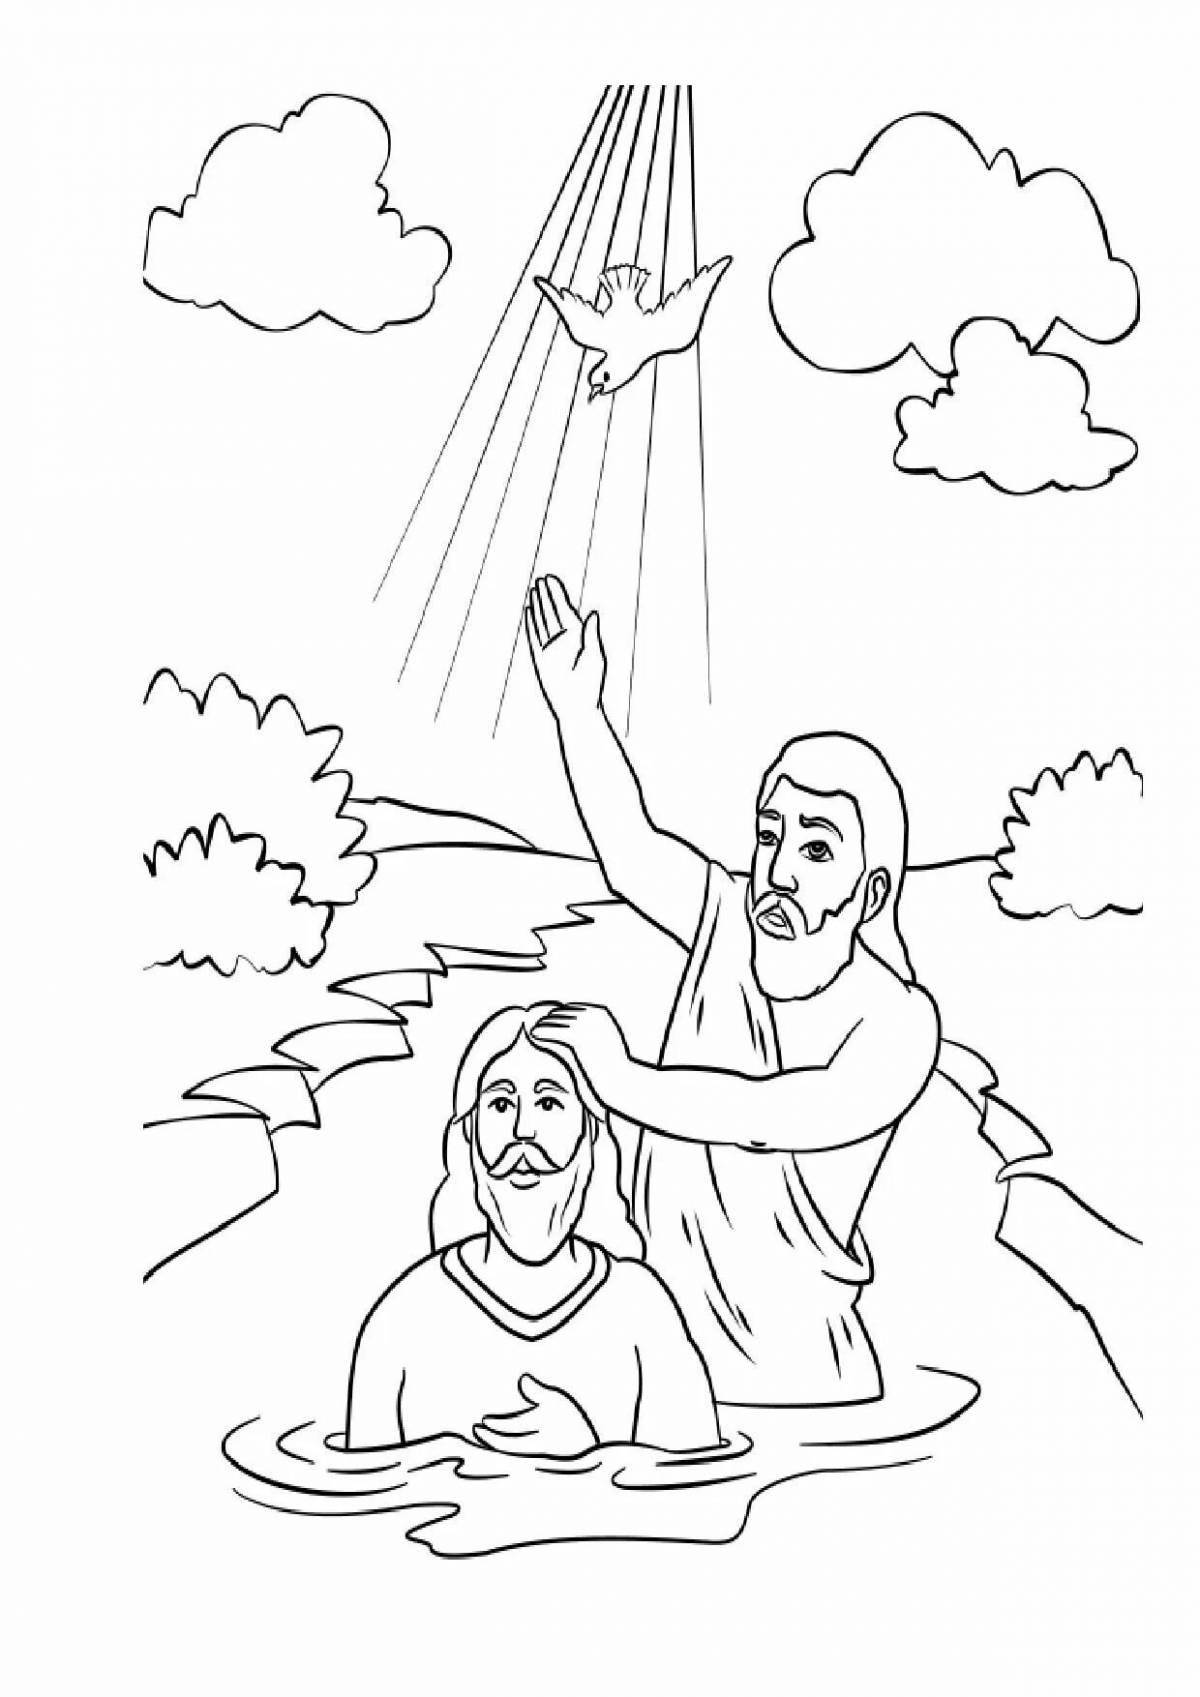 Awesome jesus baptism coloring book for kids